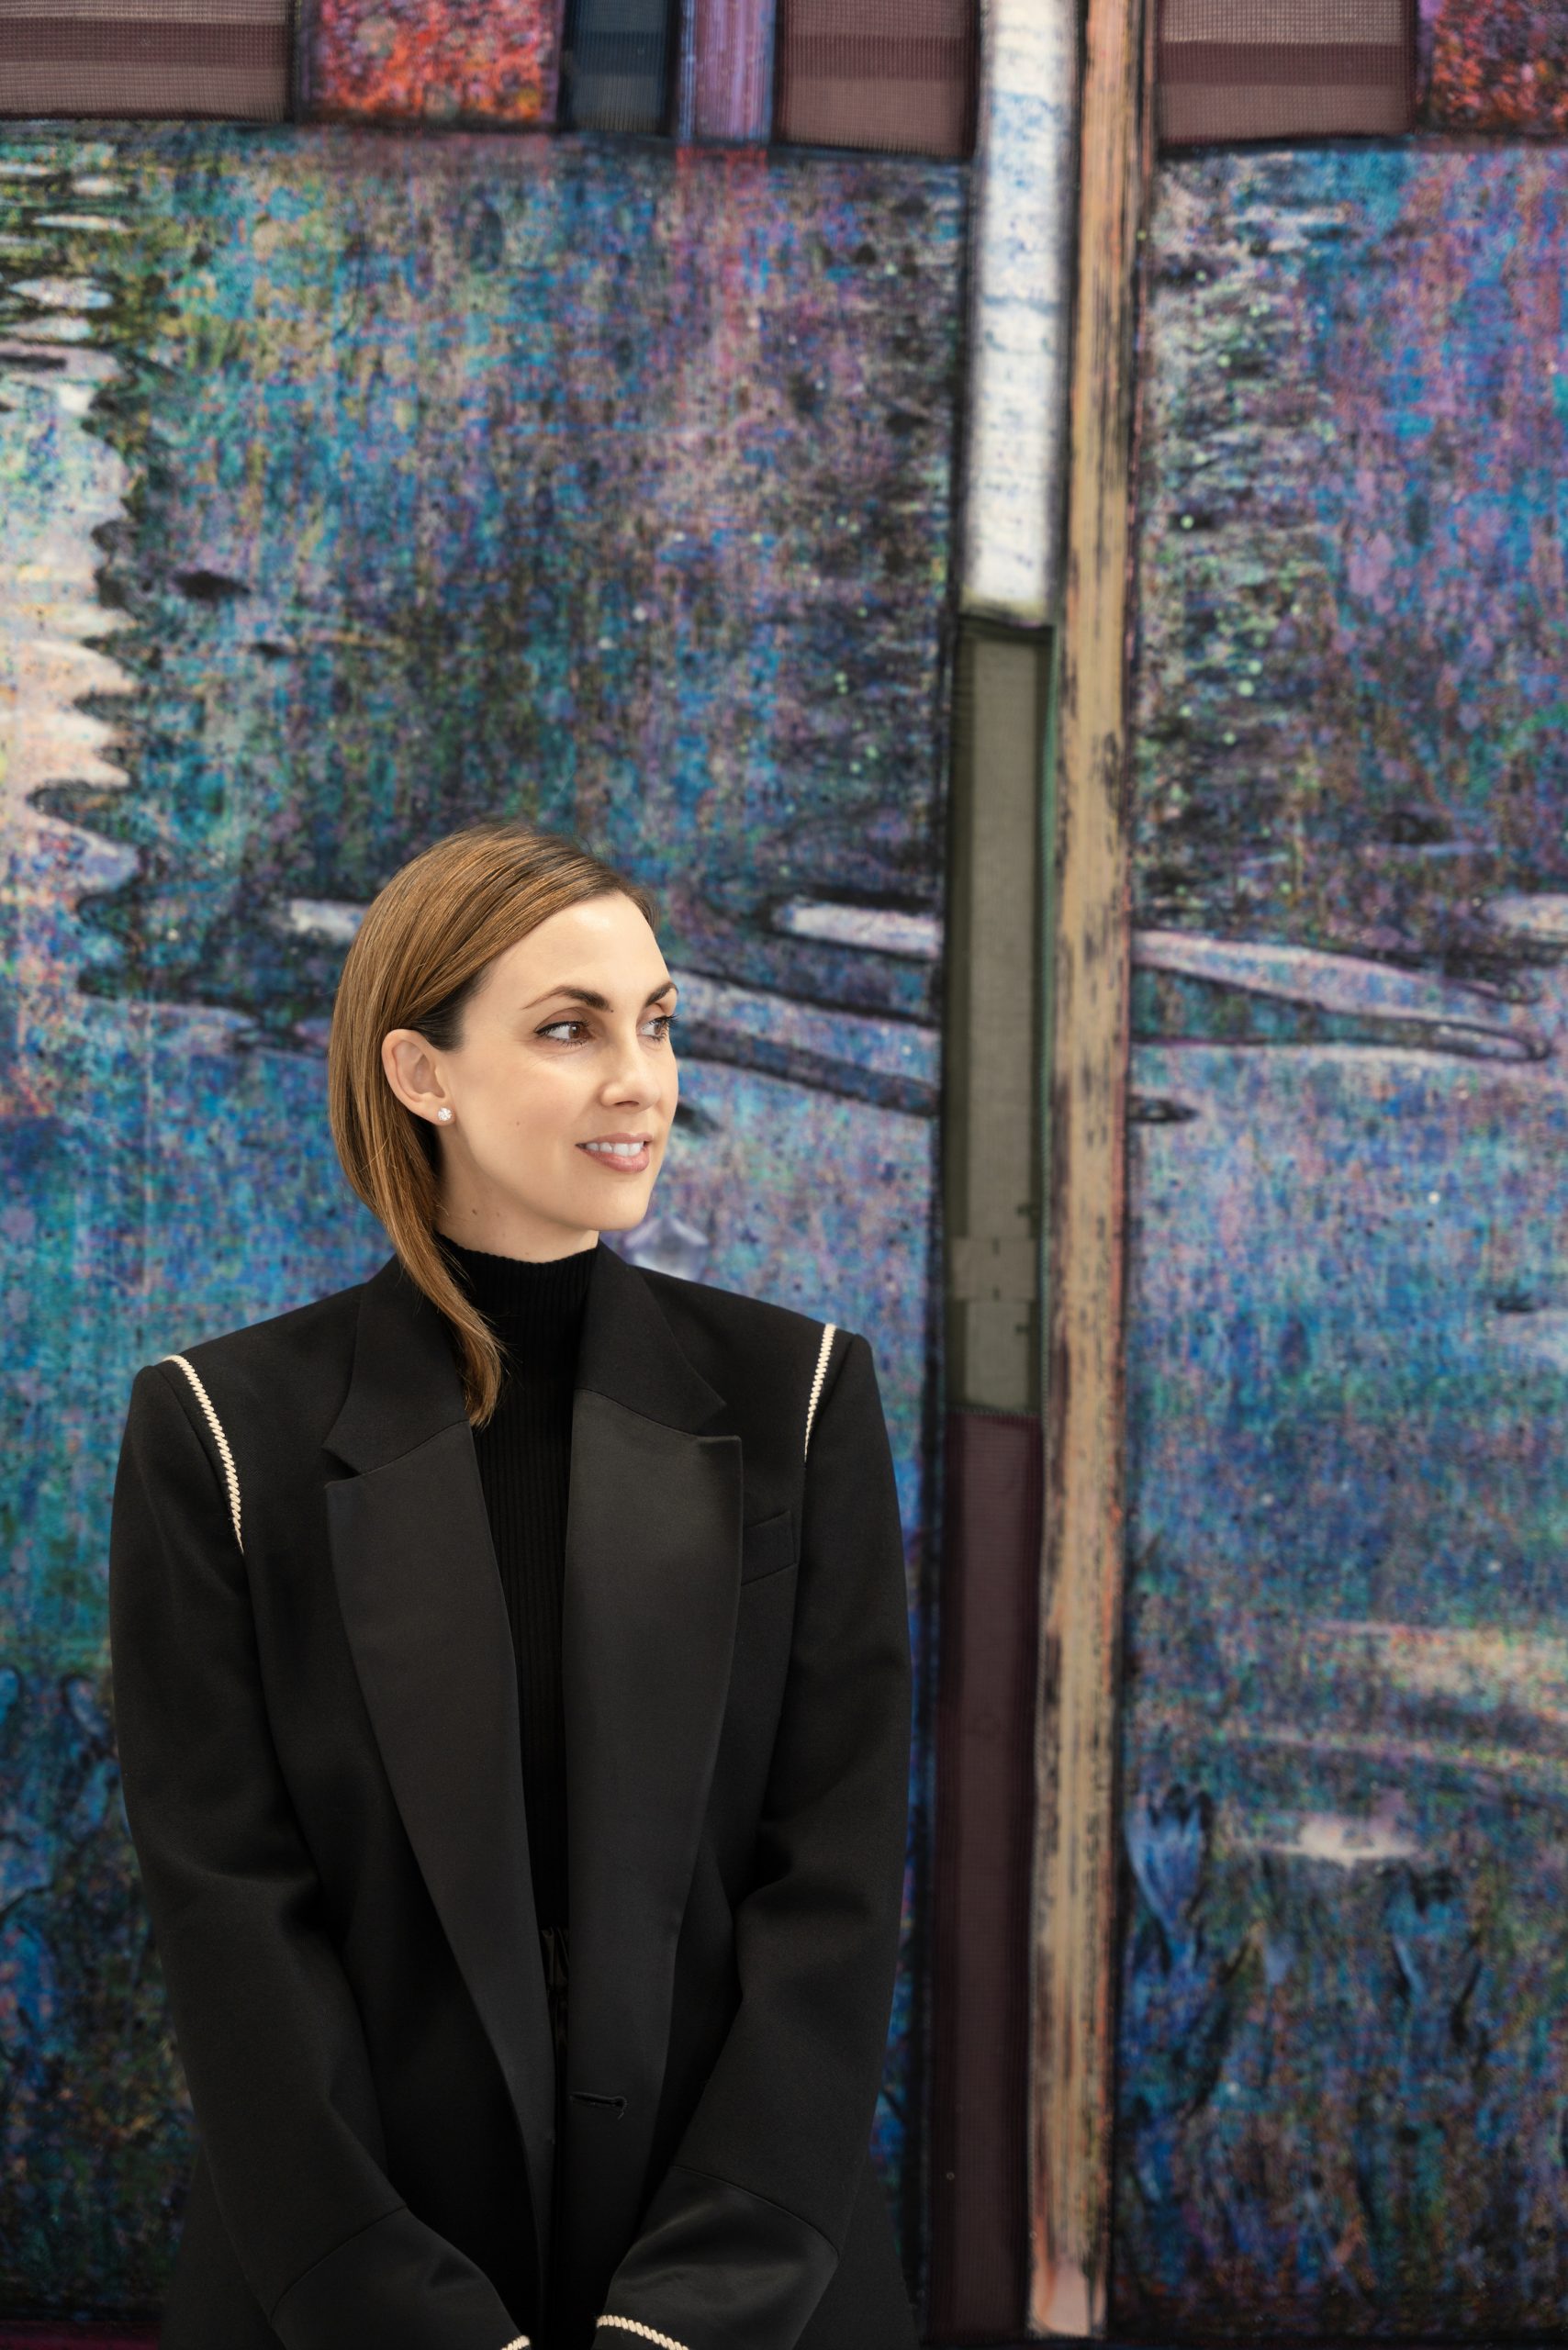 7 Questions for Carvalho Park Co-Founder Jennifer Carvalho on Art That ‘Speaks and Breathes’